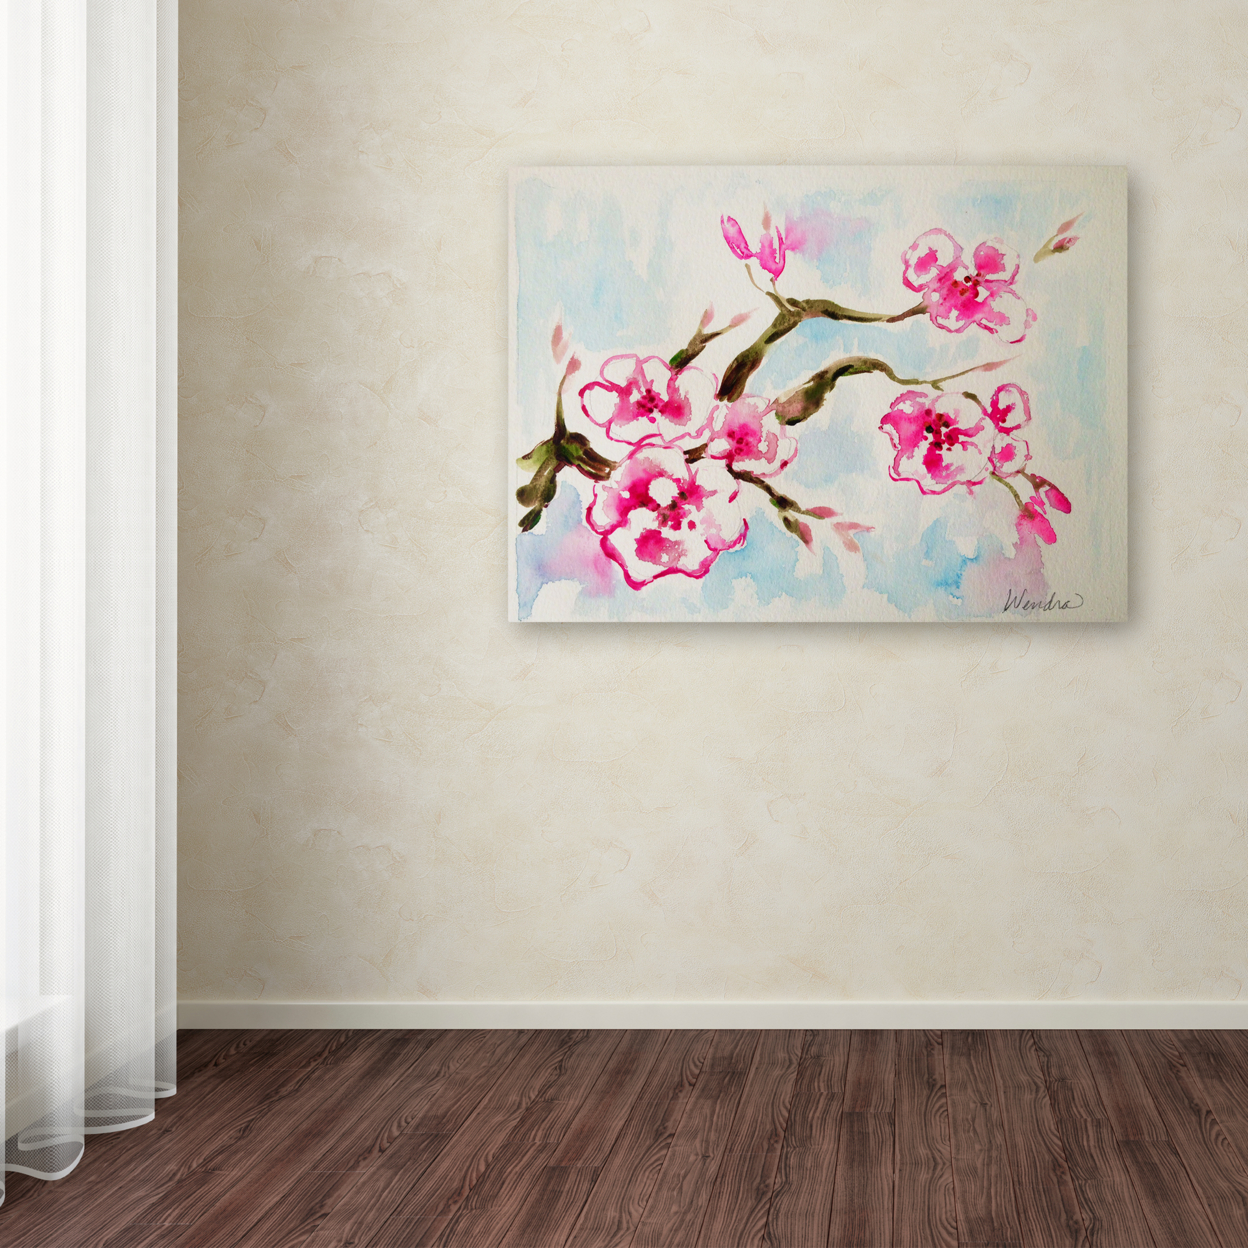 Wendra 'Cherry Blossom' Canvas Wall Art 35 X 47 Inches